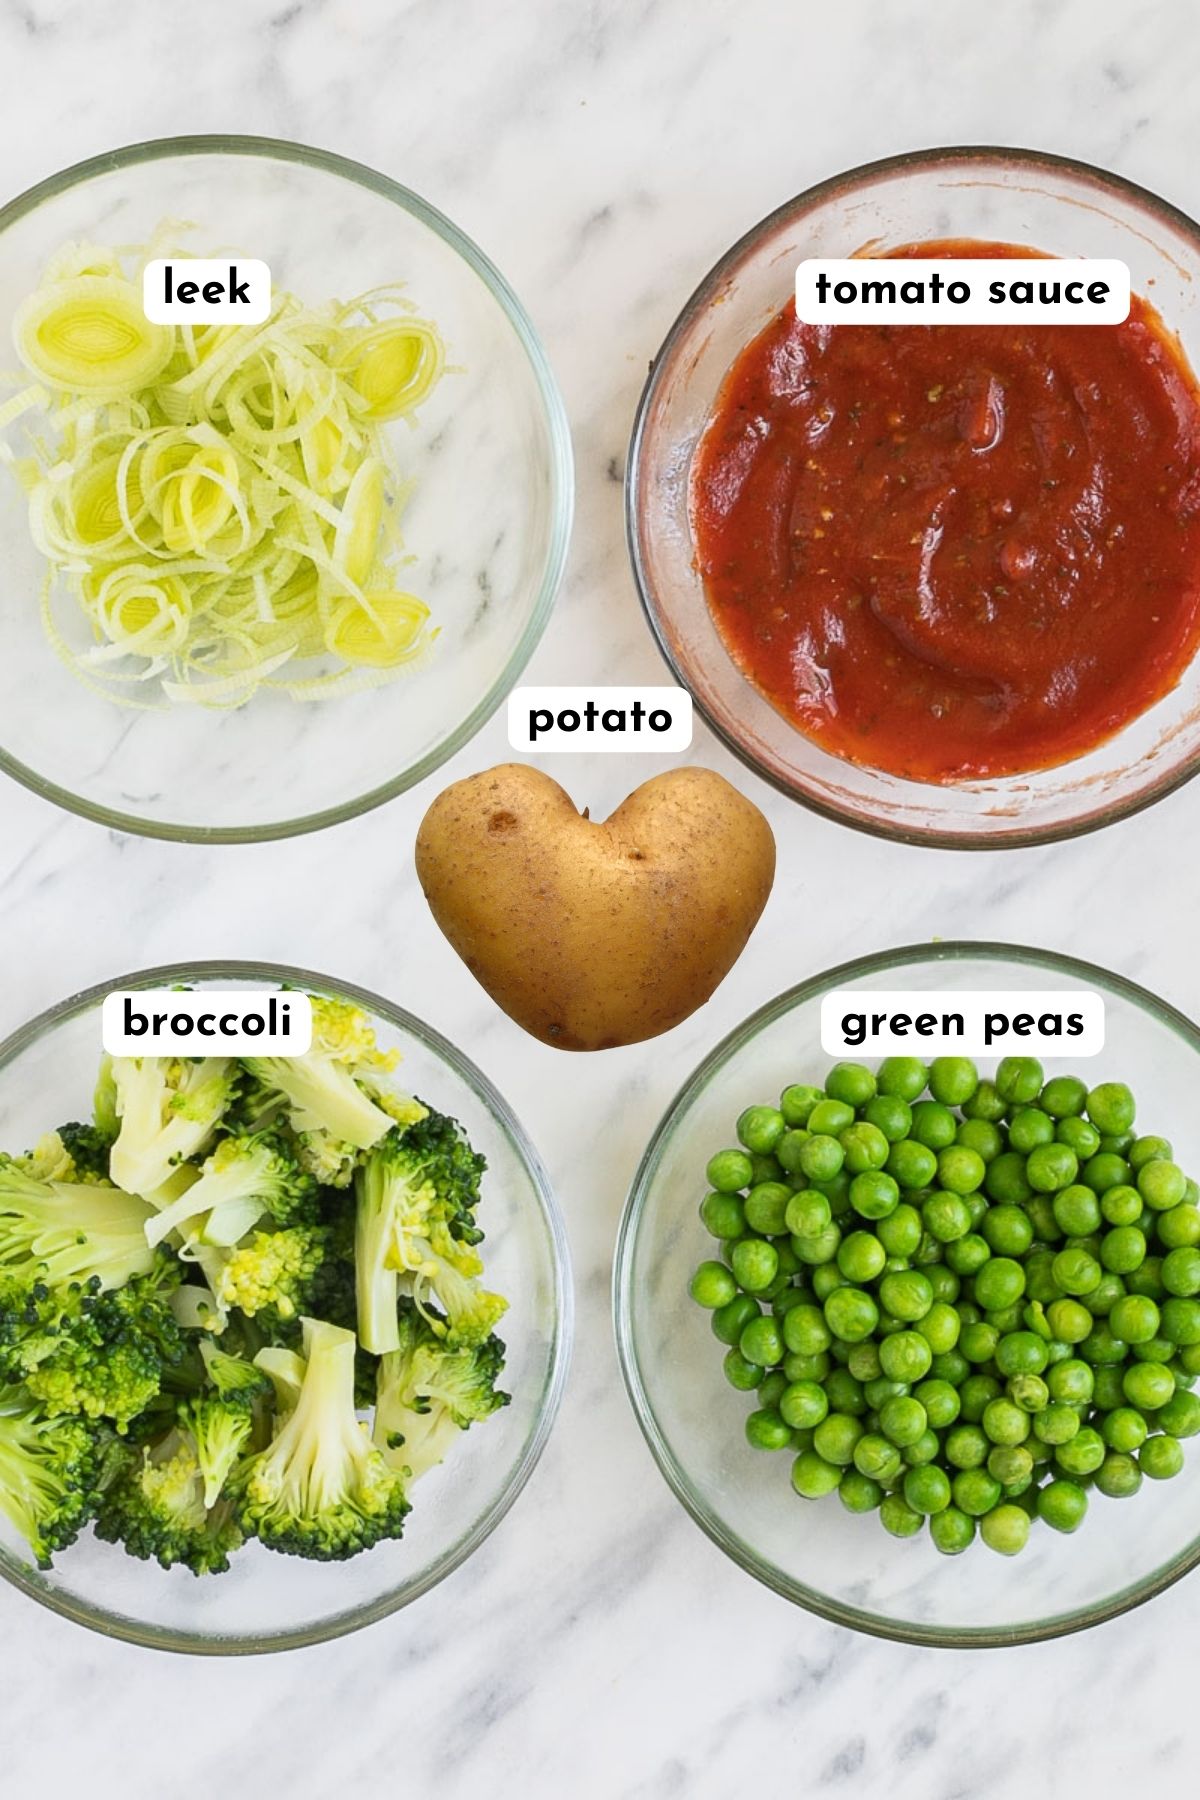 Ingredients of vegan breakfast pizza in small bowls like leek, tomato sauce, broccoli florets, green peas, and potatoes. 